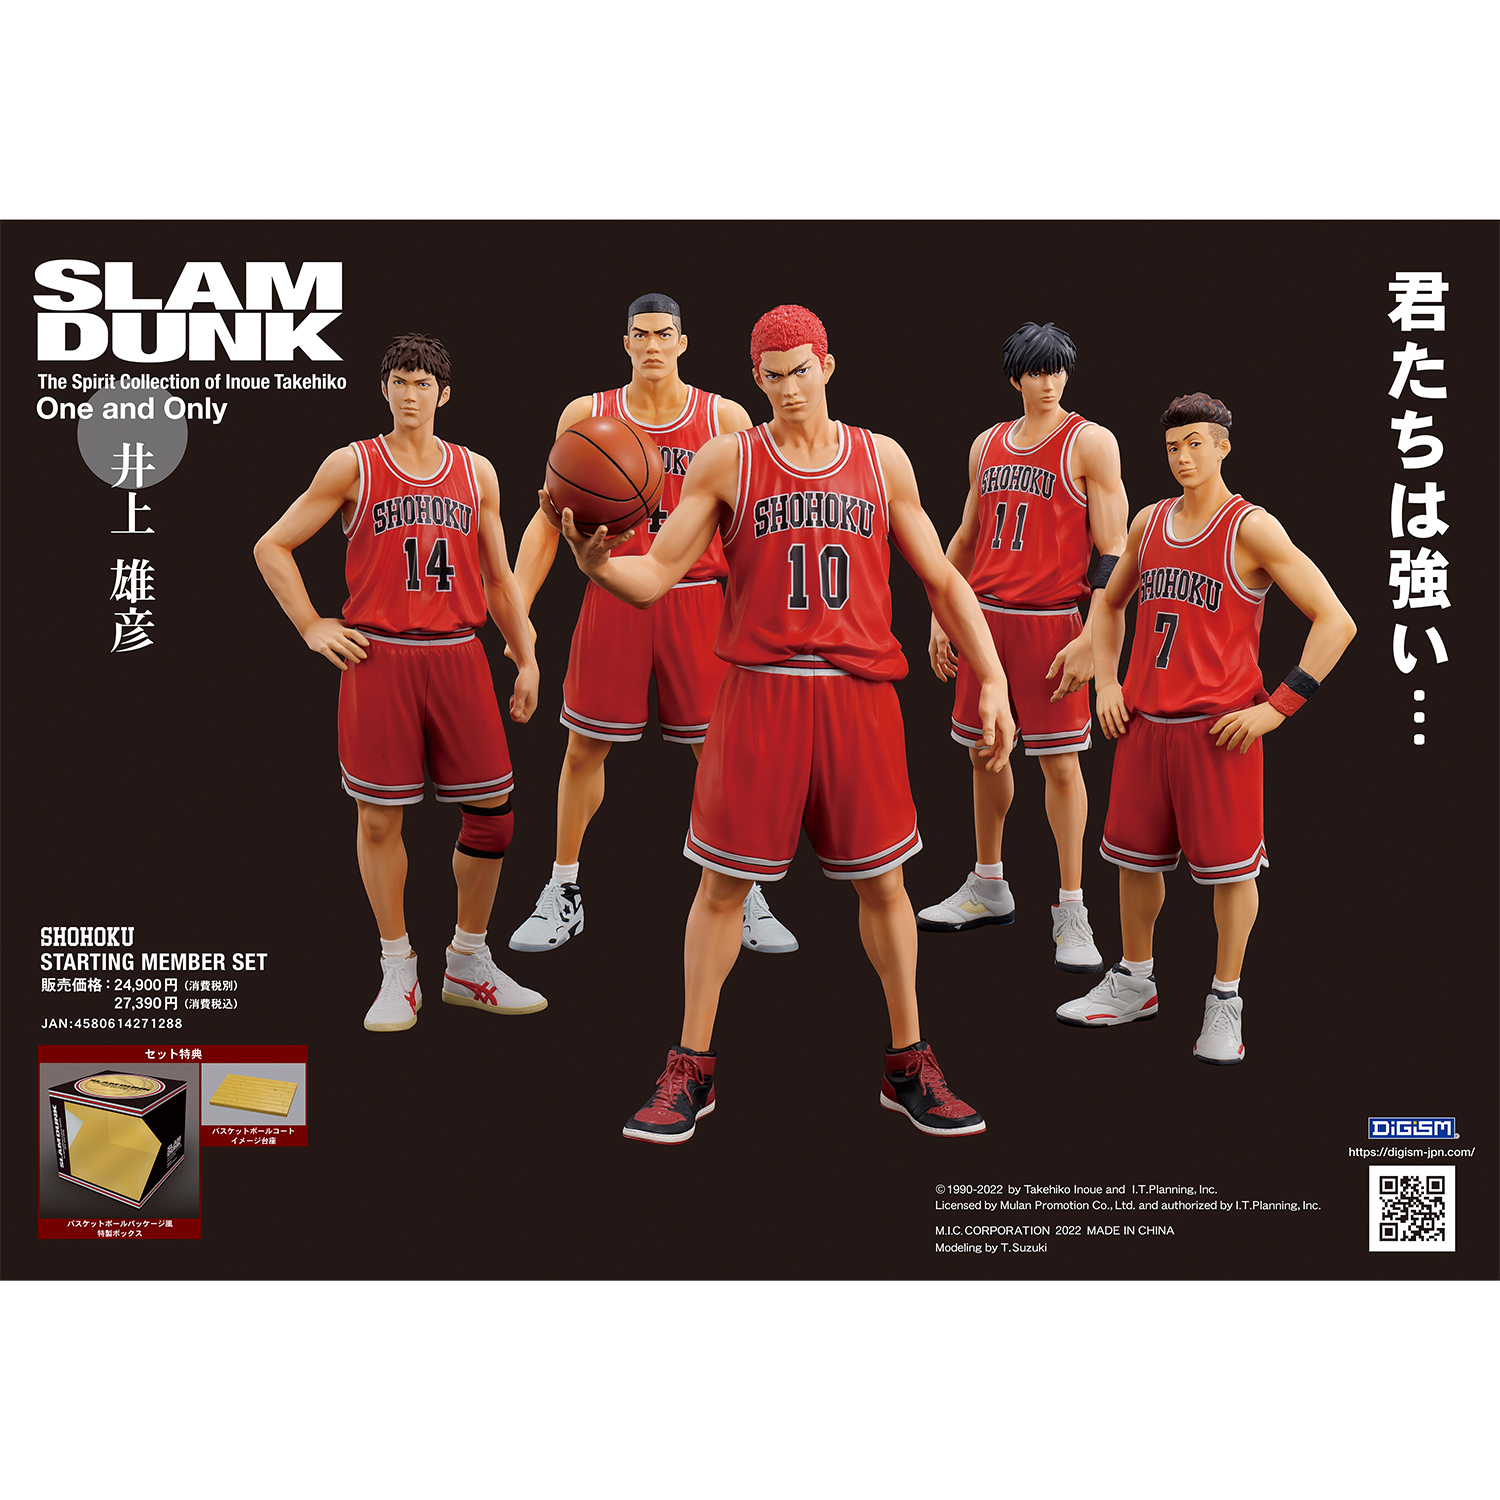 One and Only『SLAM DUNK』湘北スターティングメンバー SET170mm